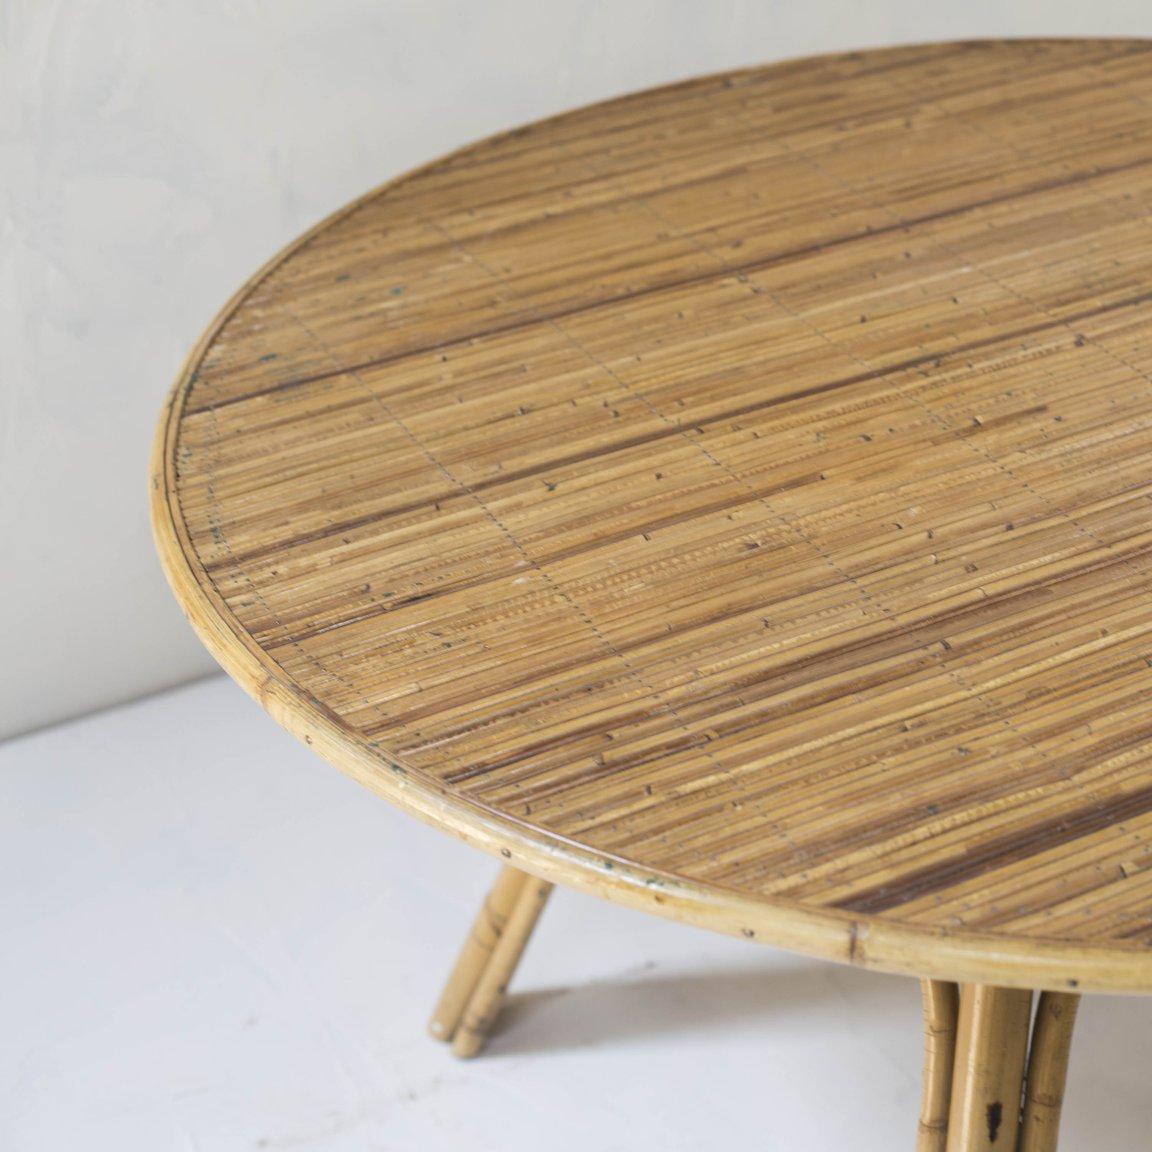 Circa 1960s / France
Size W1215 D1215 H720 mm

Round table from France, made of rattan and bamboo. Carefully crafted with a natural material. 

